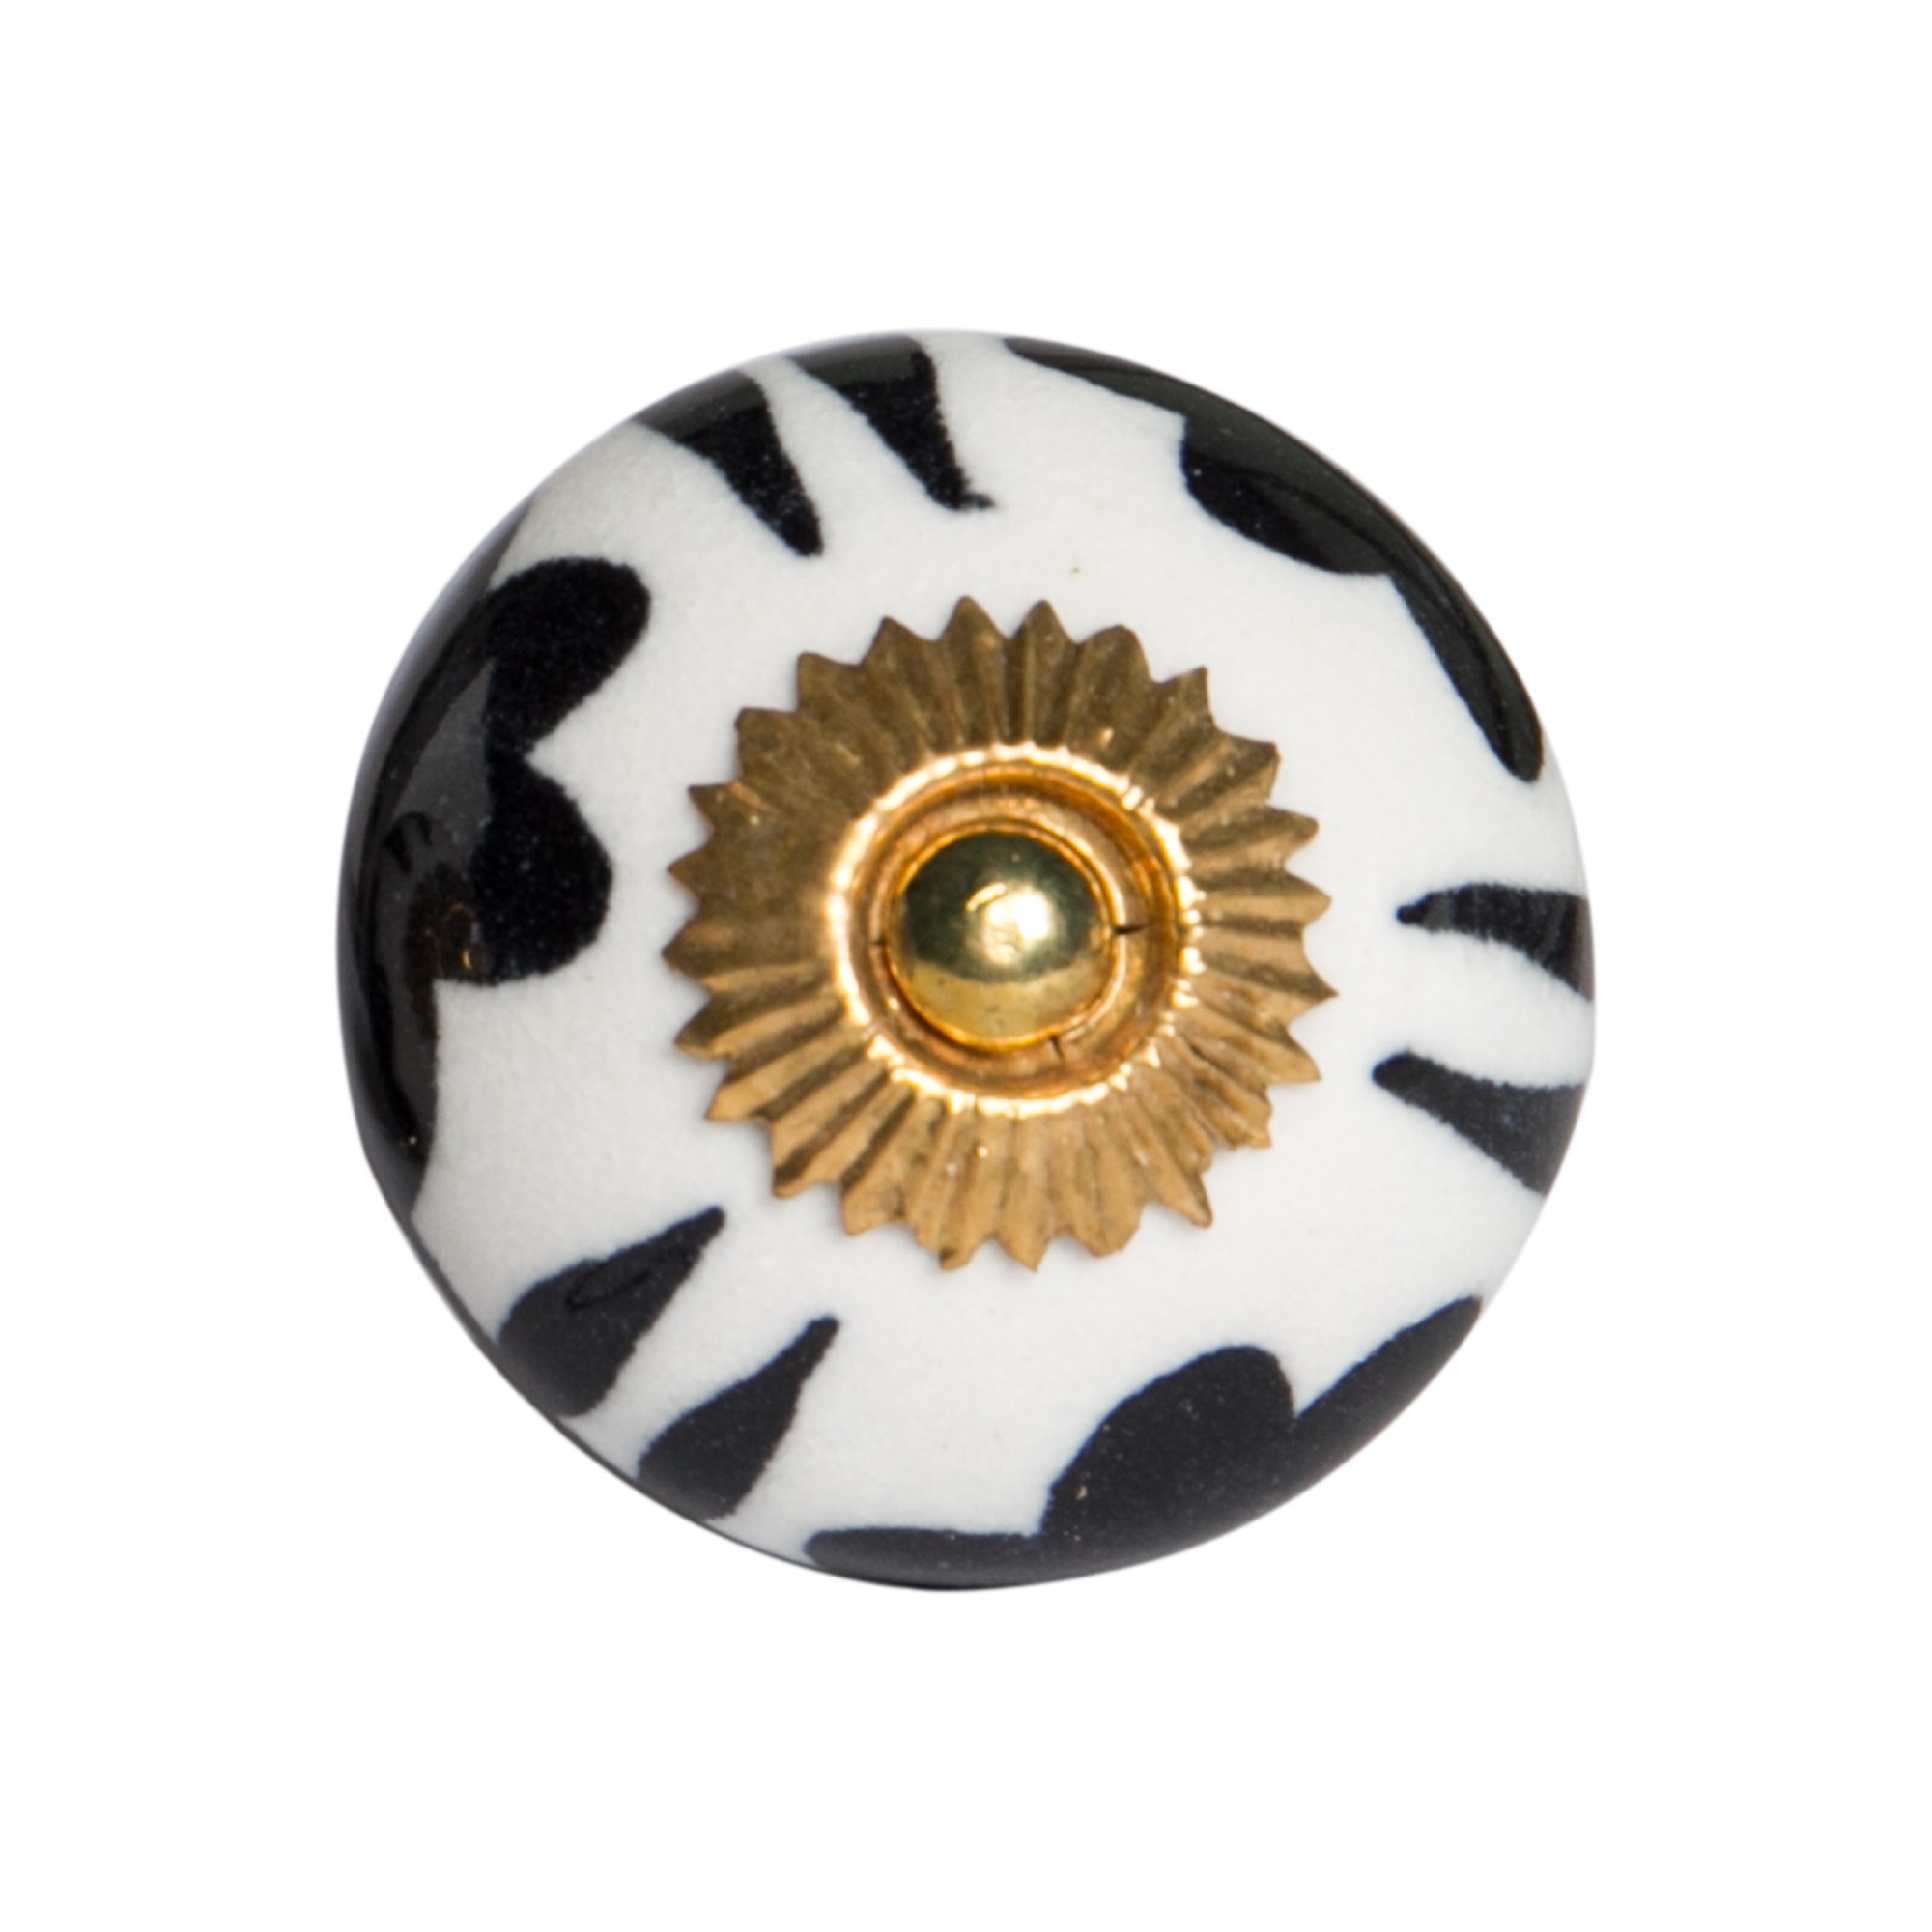 1.5" x 1.5" x 1.5" White, Black and Yellow - Knobs 12-Pack